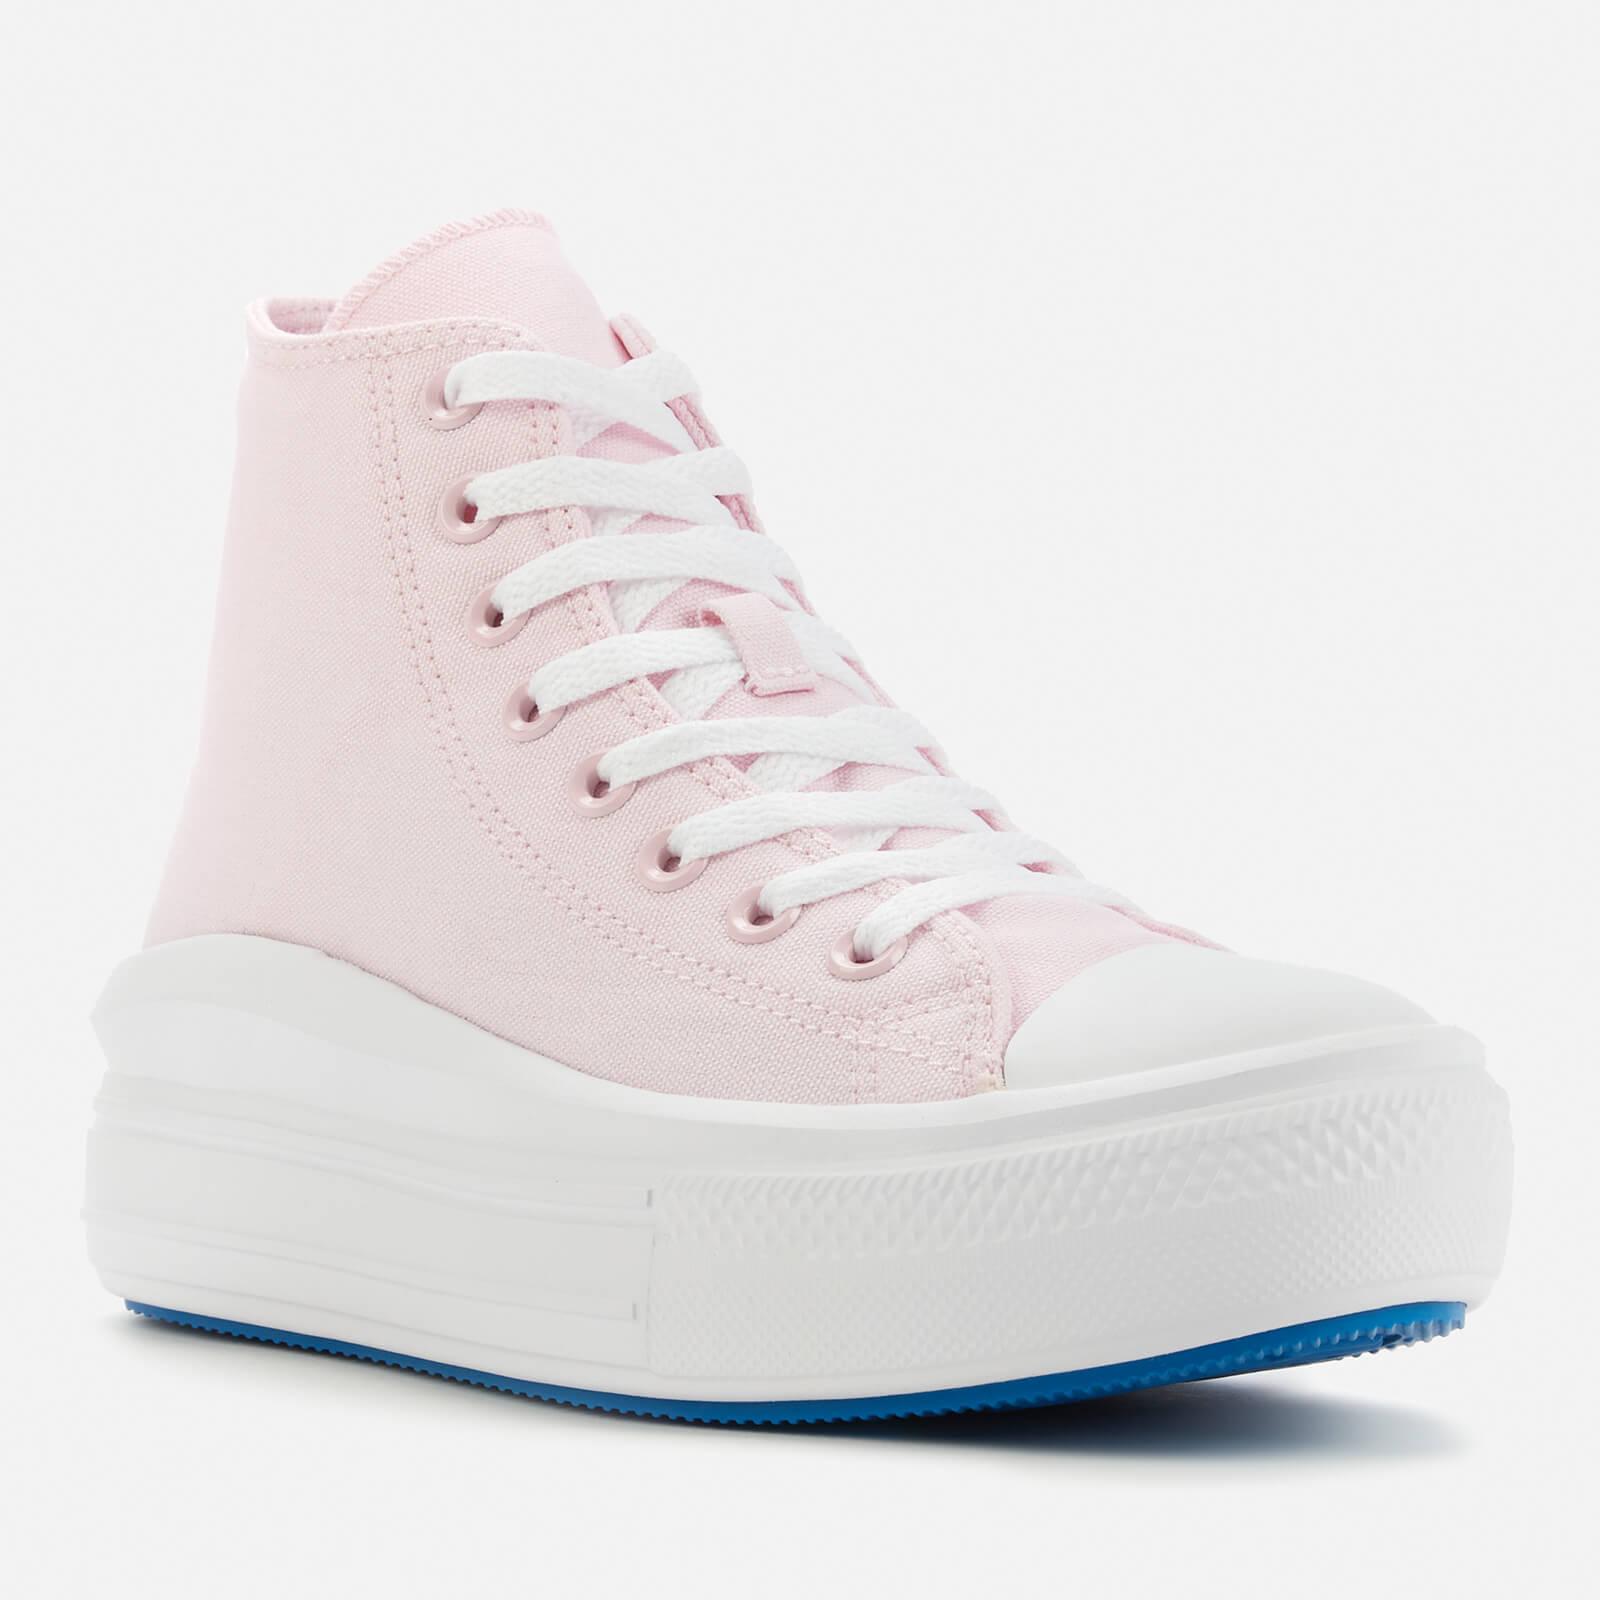 Converse Leather Chuck Taylor All Star Anodized Metals Move Hi-top Trainers  in Pink - Lyst